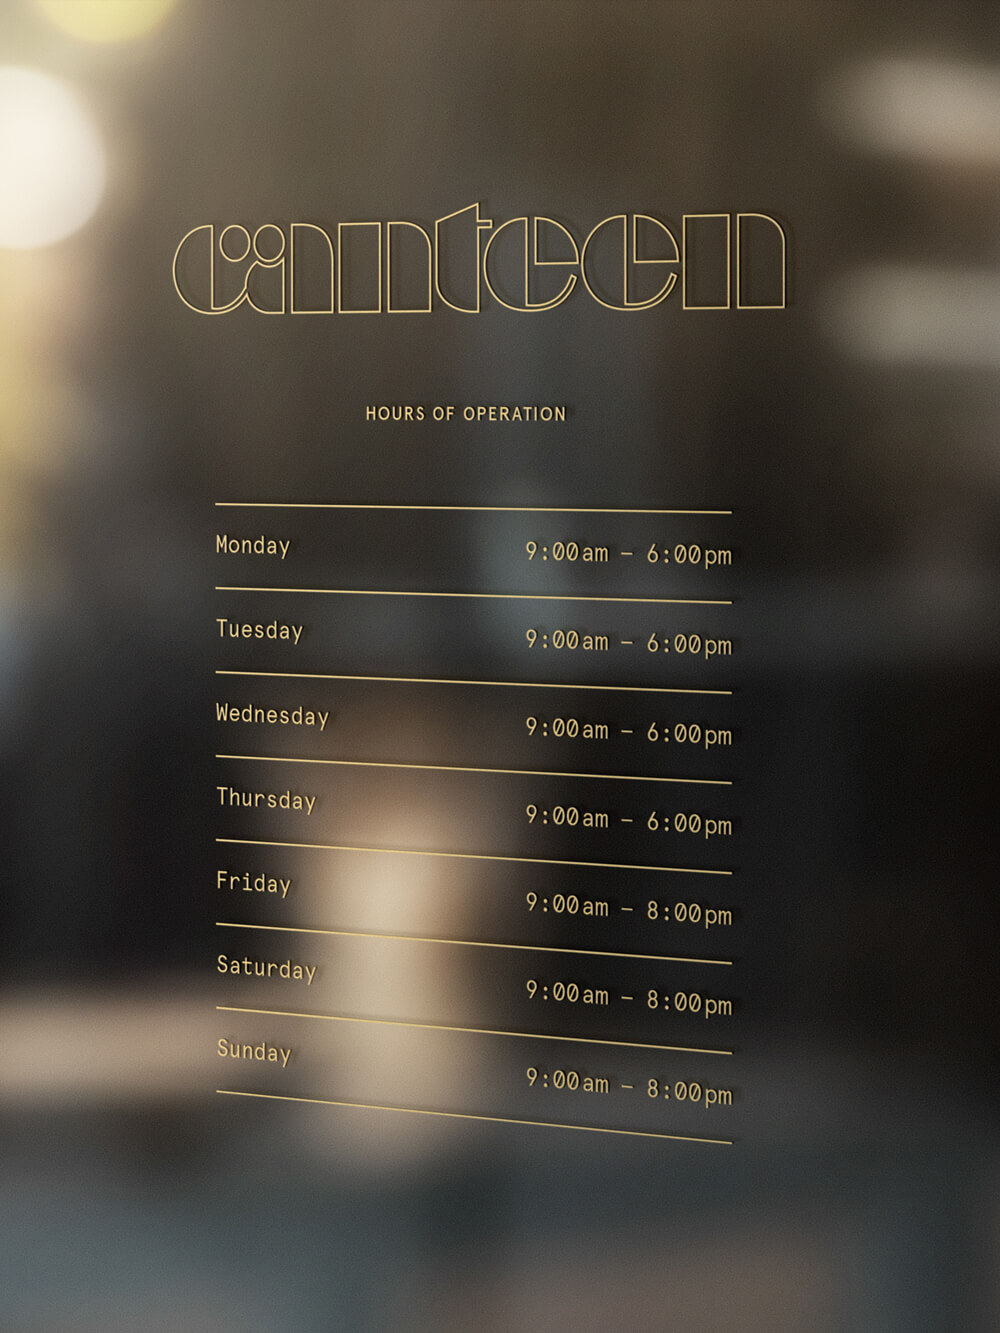 Canteen-logo-hours-1333px